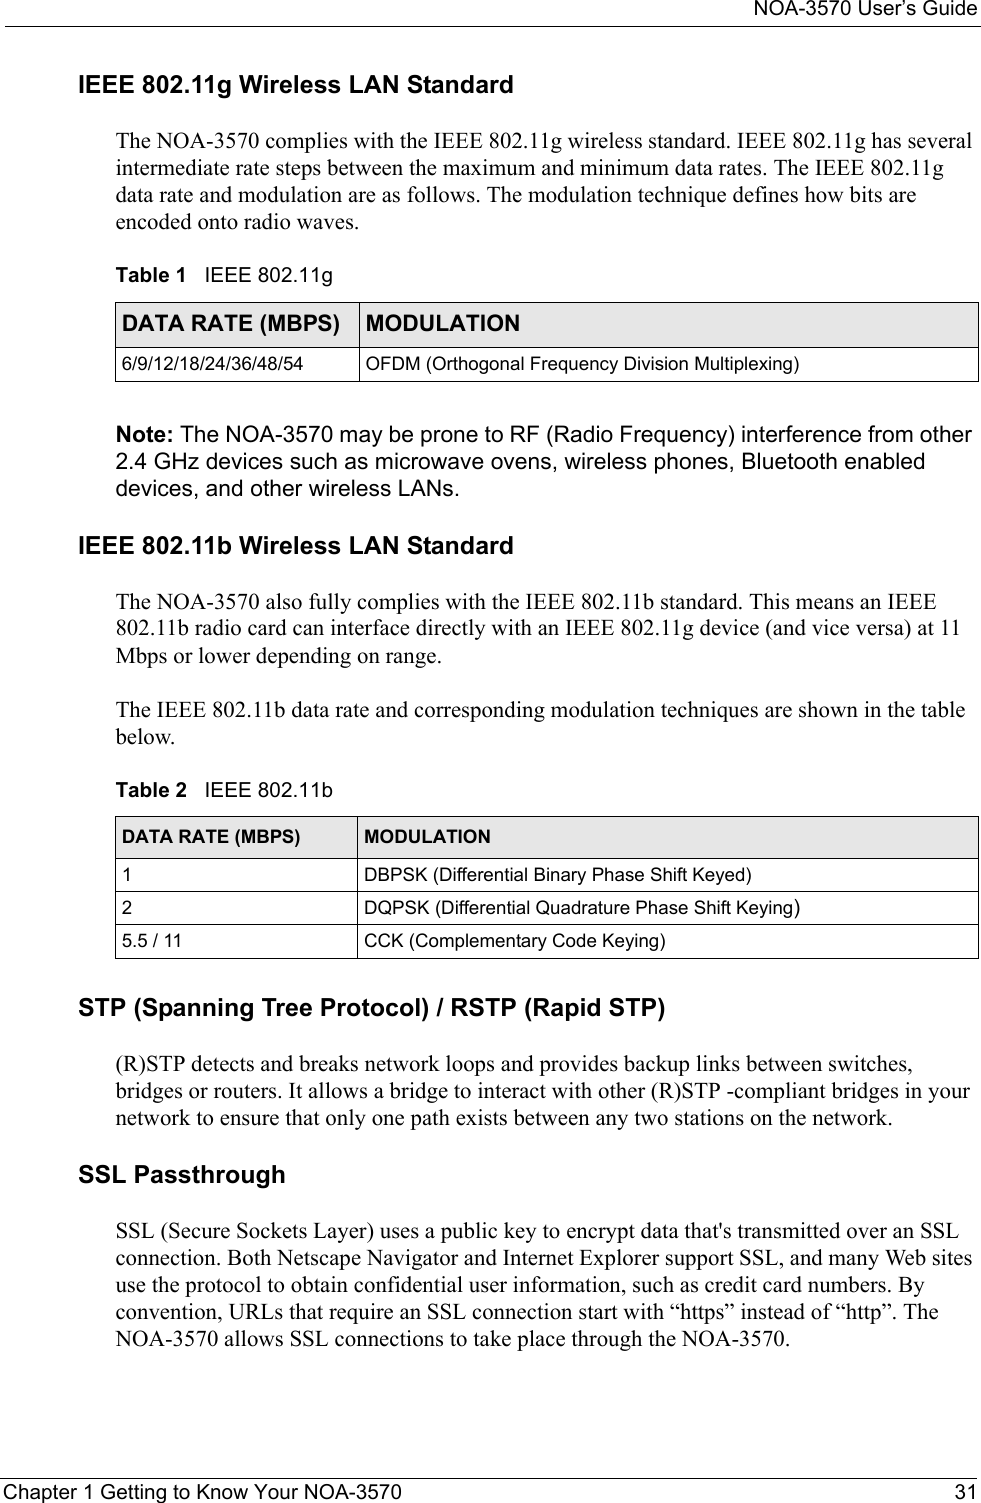 NOA-3570 User’s GuideChapter 1 Getting to Know Your NOA-3570 31IEEE 802.11g Wireless LAN StandardThe NOA-3570 complies with the IEEE 802.11g wireless standard. IEEE 802.11g has several intermediate rate steps between the maximum and minimum data rates. The IEEE 802.11g data rate and modulation are as follows. The modulation technique defines how bits are encoded onto radio waves.Note: The NOA-3570 may be prone to RF (Radio Frequency) interference from other 2.4 GHz devices such as microwave ovens, wireless phones, Bluetooth enabled devices, and other wireless LANs.IEEE 802.11b Wireless LAN StandardThe NOA-3570 also fully complies with the IEEE 802.11b standard. This means an IEEE 802.11b radio card can interface directly with an IEEE 802.11g device (and vice versa) at 11 Mbps or lower depending on range.The IEEE 802.11b data rate and corresponding modulation techniques are shown in the table below. STP (Spanning Tree Protocol) / RSTP (Rapid STP)(R)STP detects and breaks network loops and provides backup links between switches, bridges or routers. It allows a bridge to interact with other (R)STP -compliant bridges in your network to ensure that only one path exists between any two stations on the network.SSL PassthroughSSL (Secure Sockets Layer) uses a public key to encrypt data that&apos;s transmitted over an SSL connection. Both Netscape Navigator and Internet Explorer support SSL, and many Web sites use the protocol to obtain confidential user information, such as credit card numbers. By convention, URLs that require an SSL connection start with “https” instead of “http”. The NOA-3570 allows SSL connections to take place through the NOA-3570.Table 1   IEEE 802.11gDATA RATE (MBPS) MODULATION6/9/12/18/24/36/48/54 OFDM (Orthogonal Frequency Division Multiplexing)Table 2   IEEE 802.11bDATA RATE (MBPS) MODULATION1DBPSK (Differential Binary Phase Shift Keyed)2DQPSK (Differential Quadrature Phase Shift Keying)5.5 / 11 CCK (Complementary Code Keying)